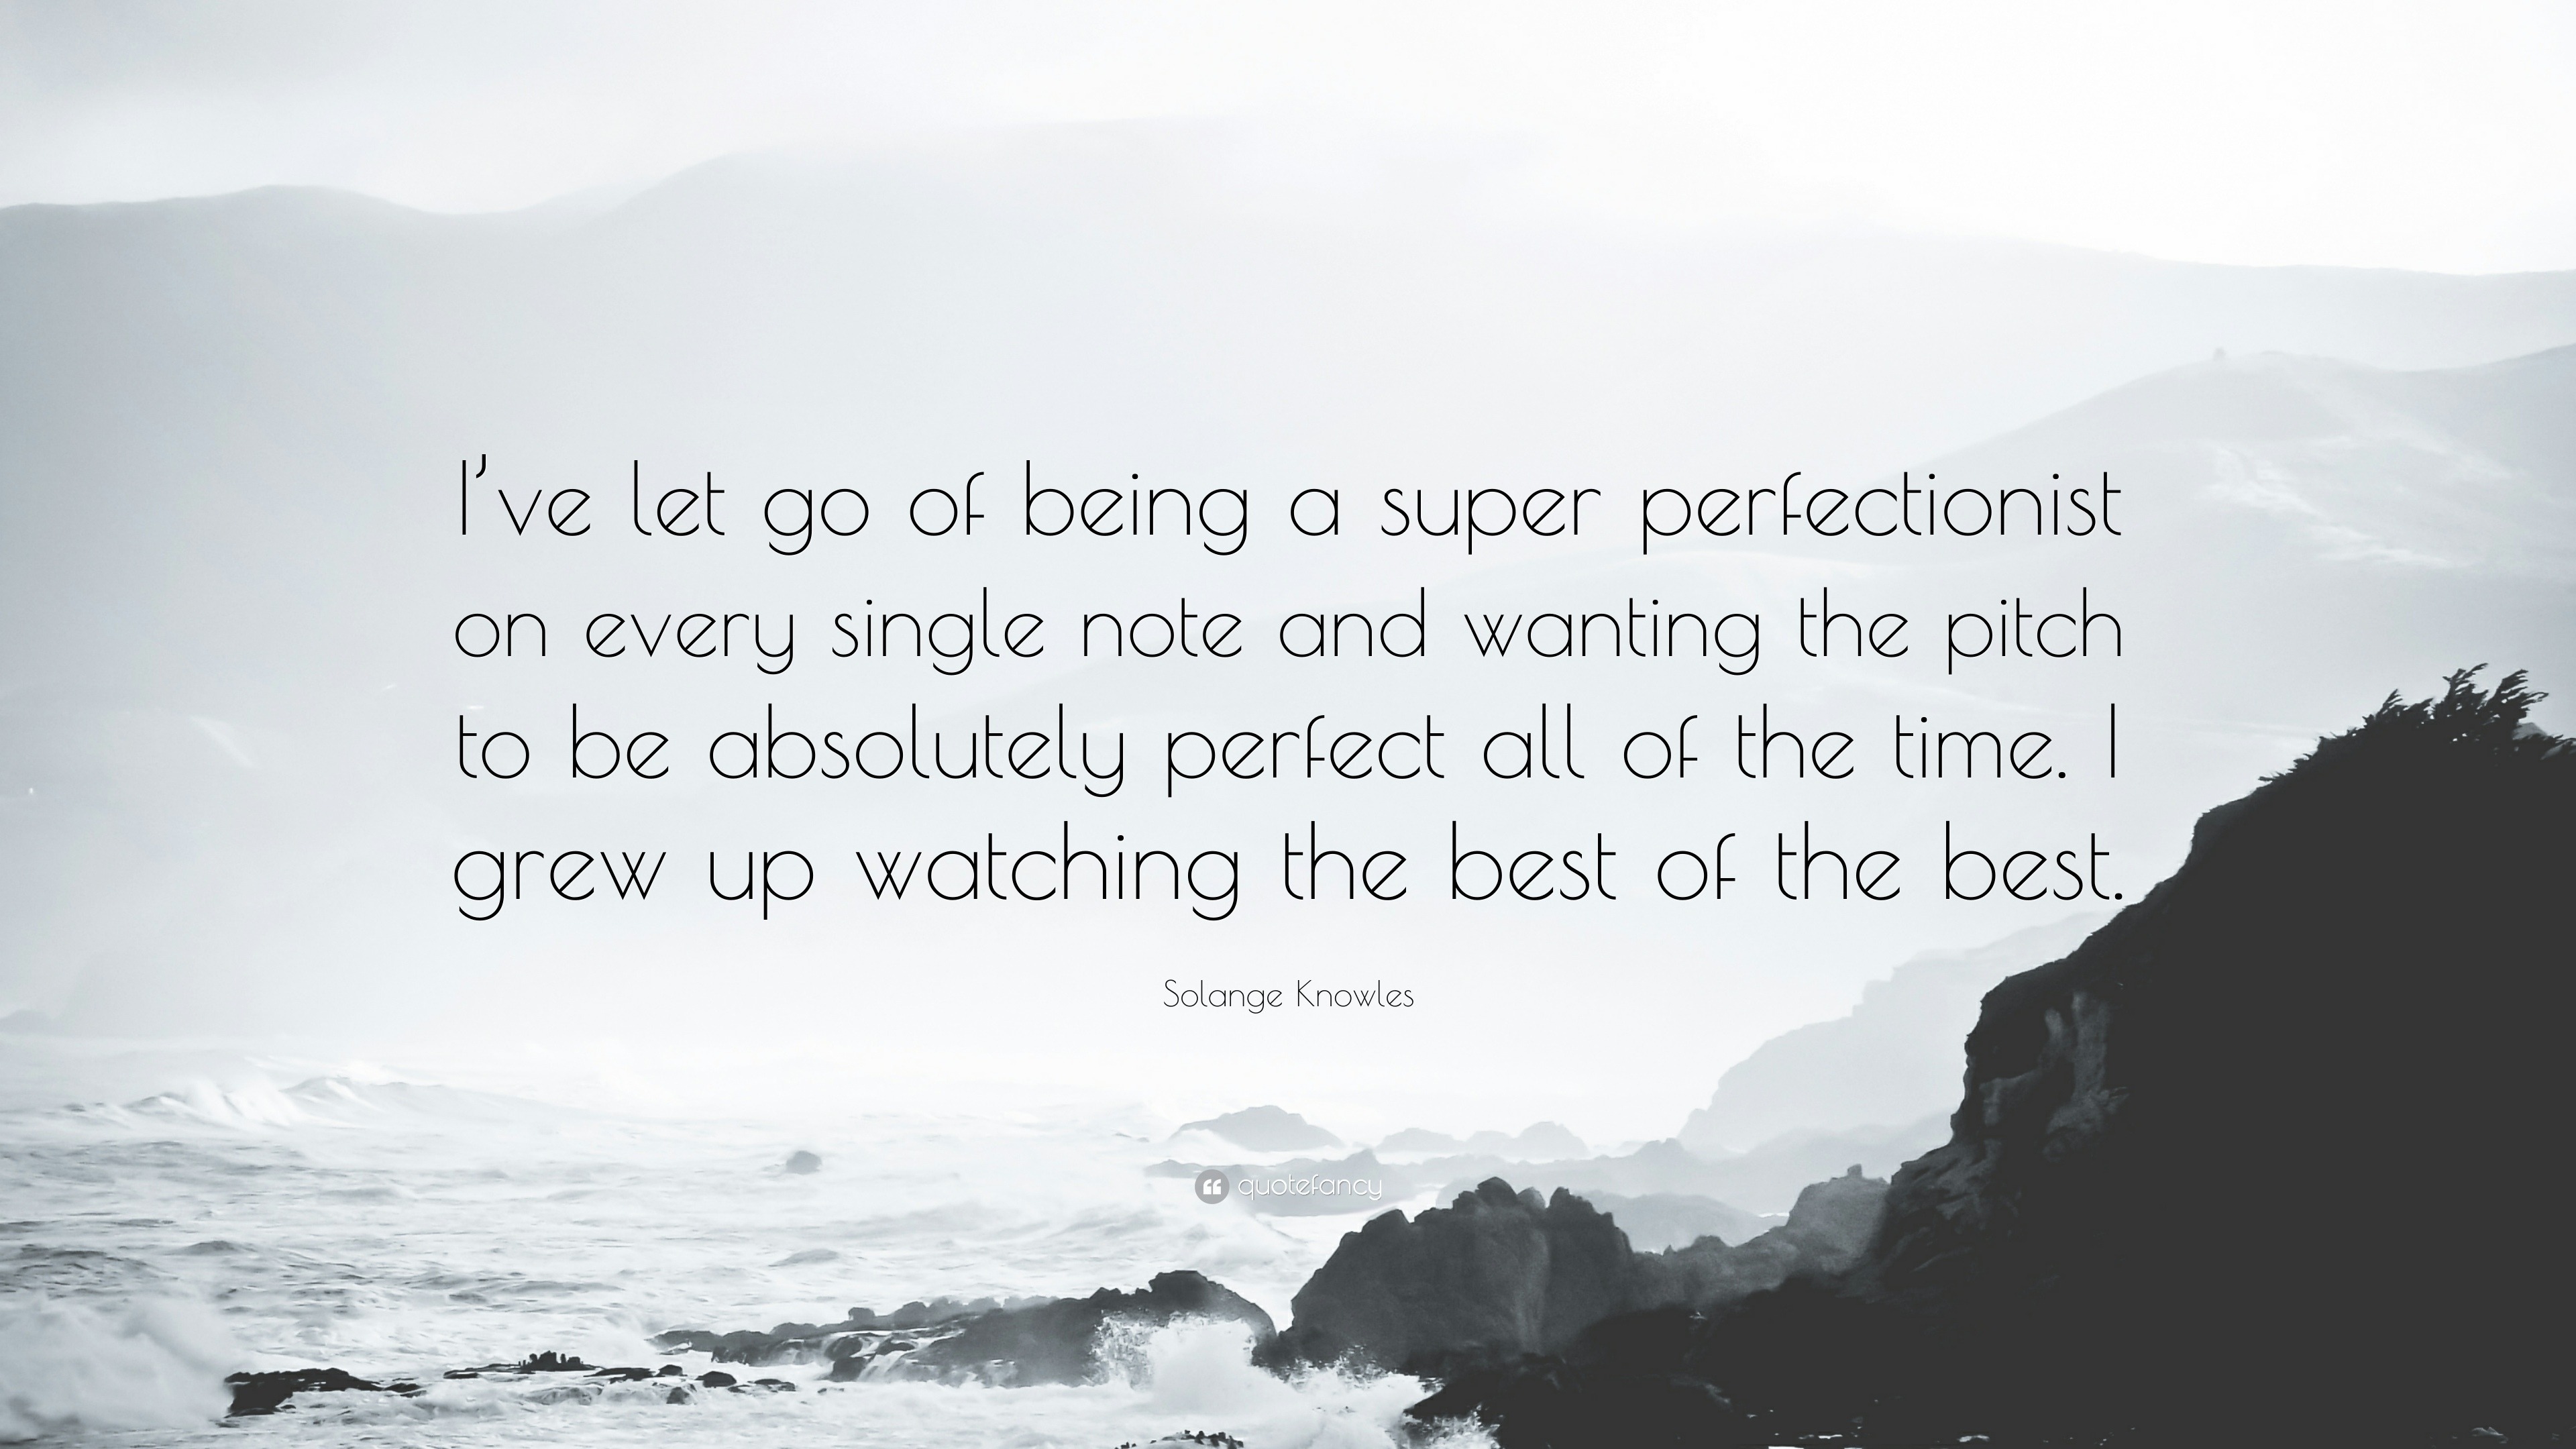 How to Let Go of Perfectionism